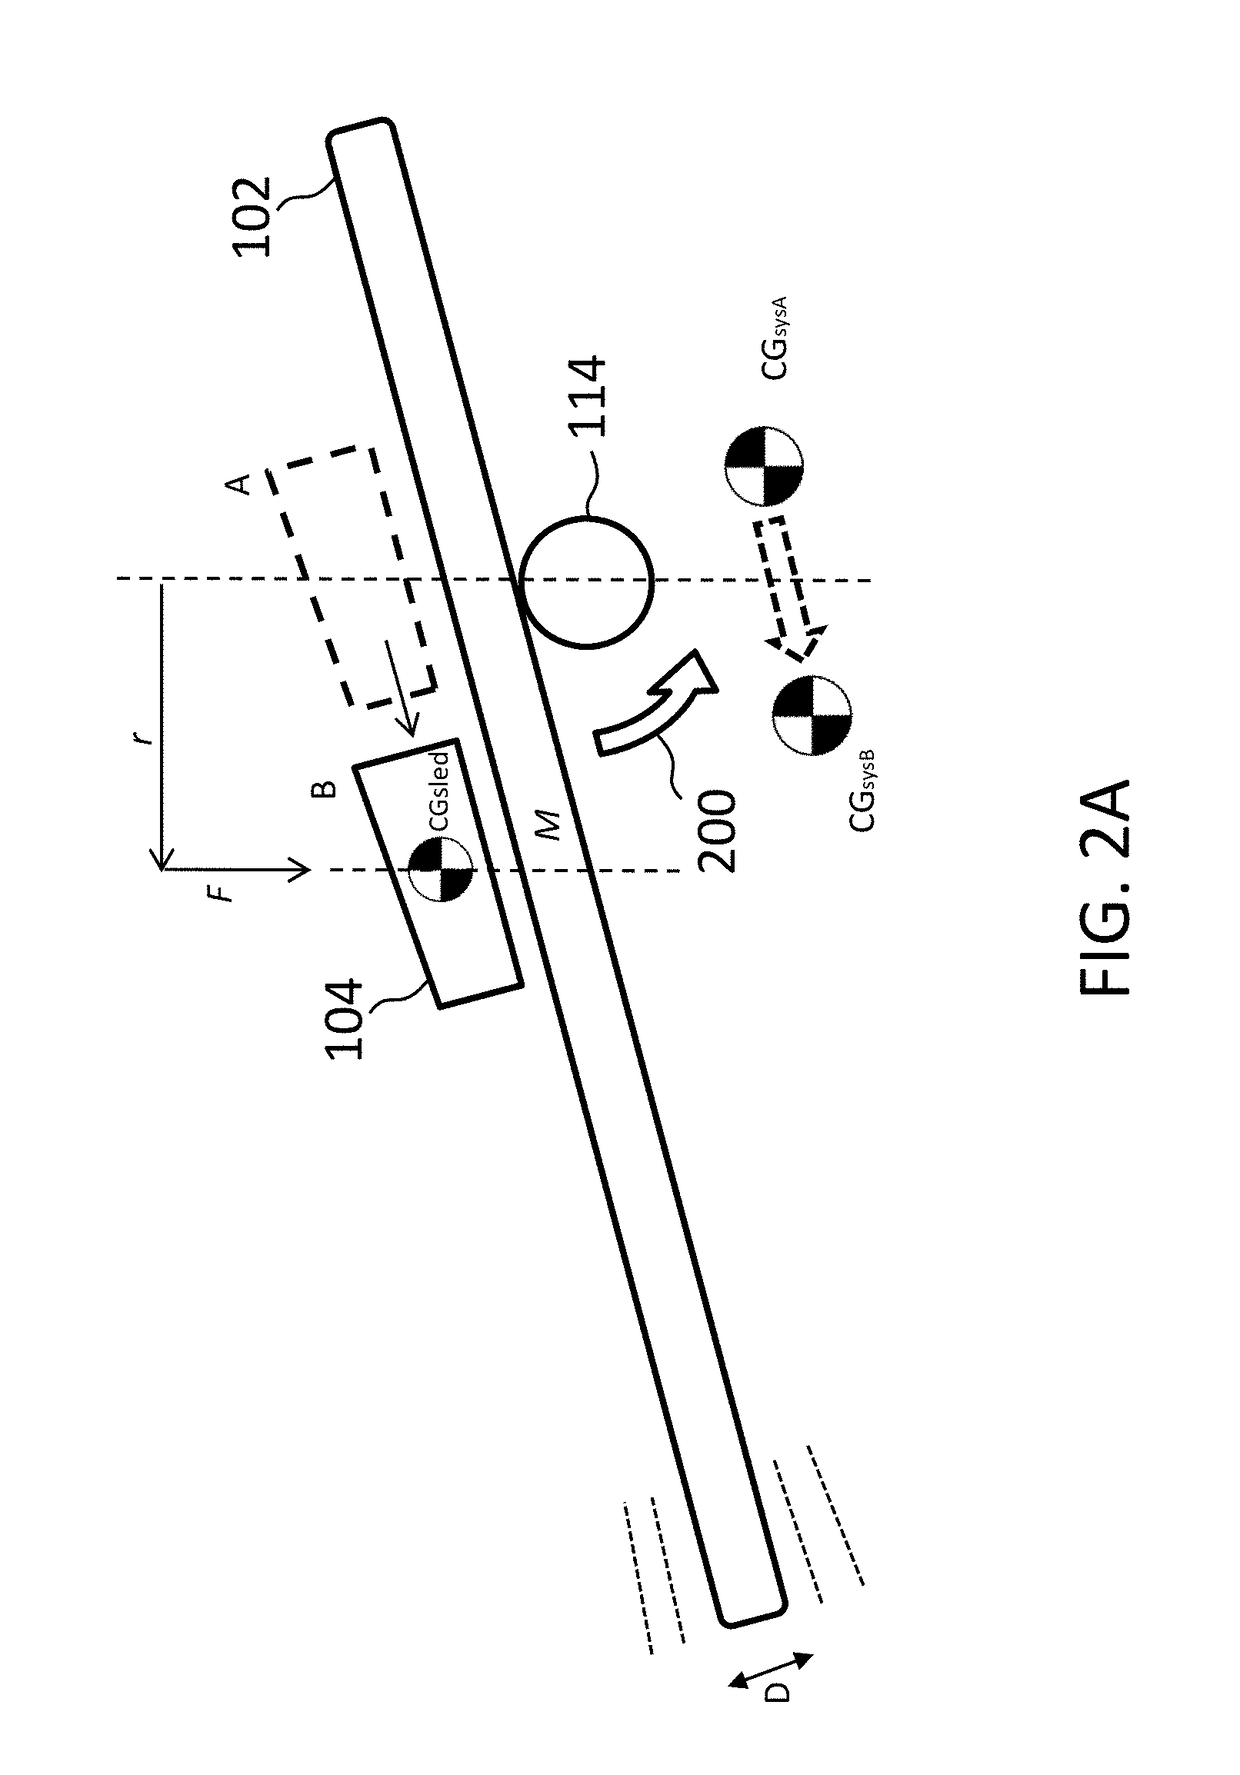 Components and methods for balancing a catheter controller system with a counterweight